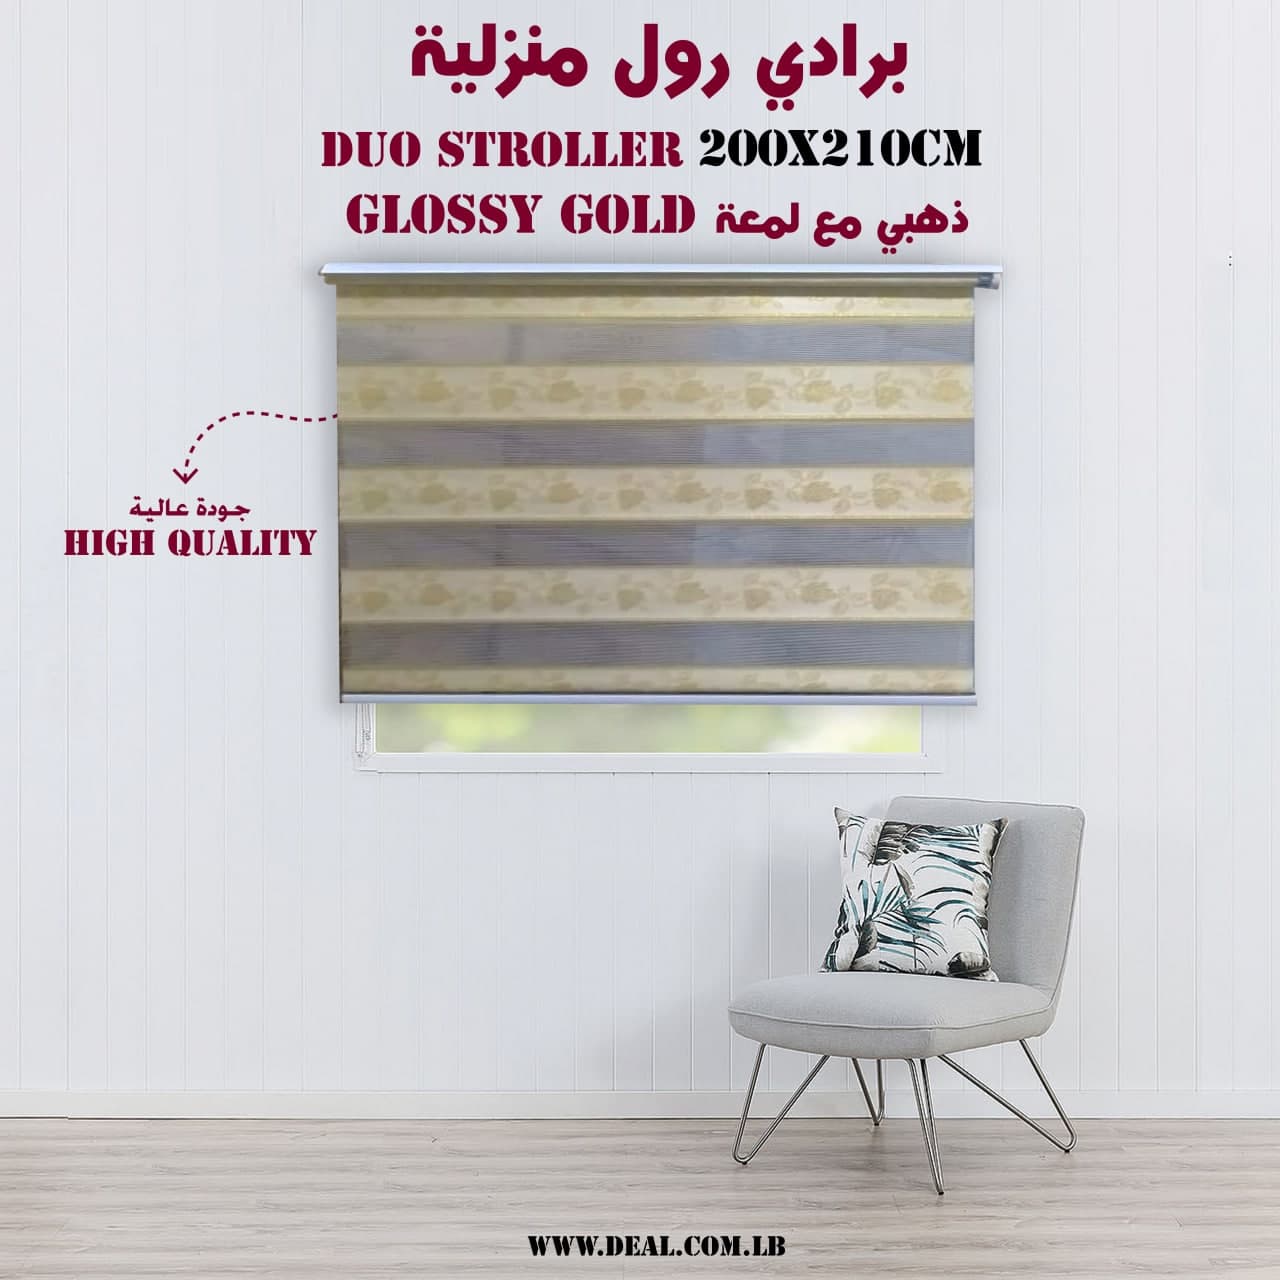 Glossy+Gold+Duo+Curtain+With+Flower+Design+200x210